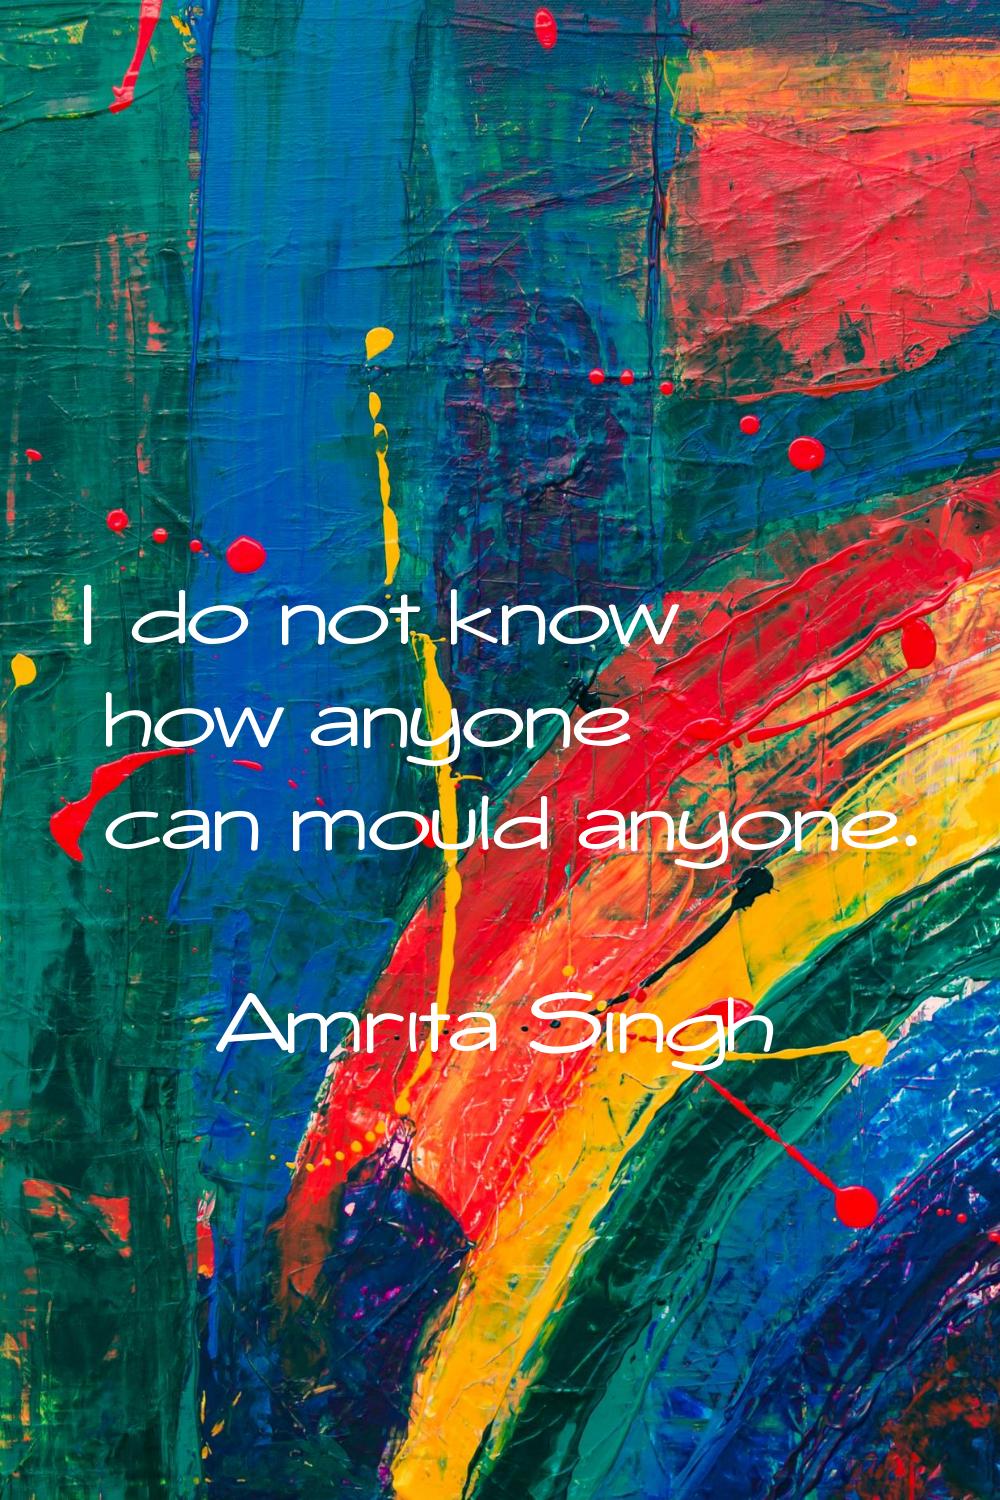 I do not know how anyone can mould anyone.